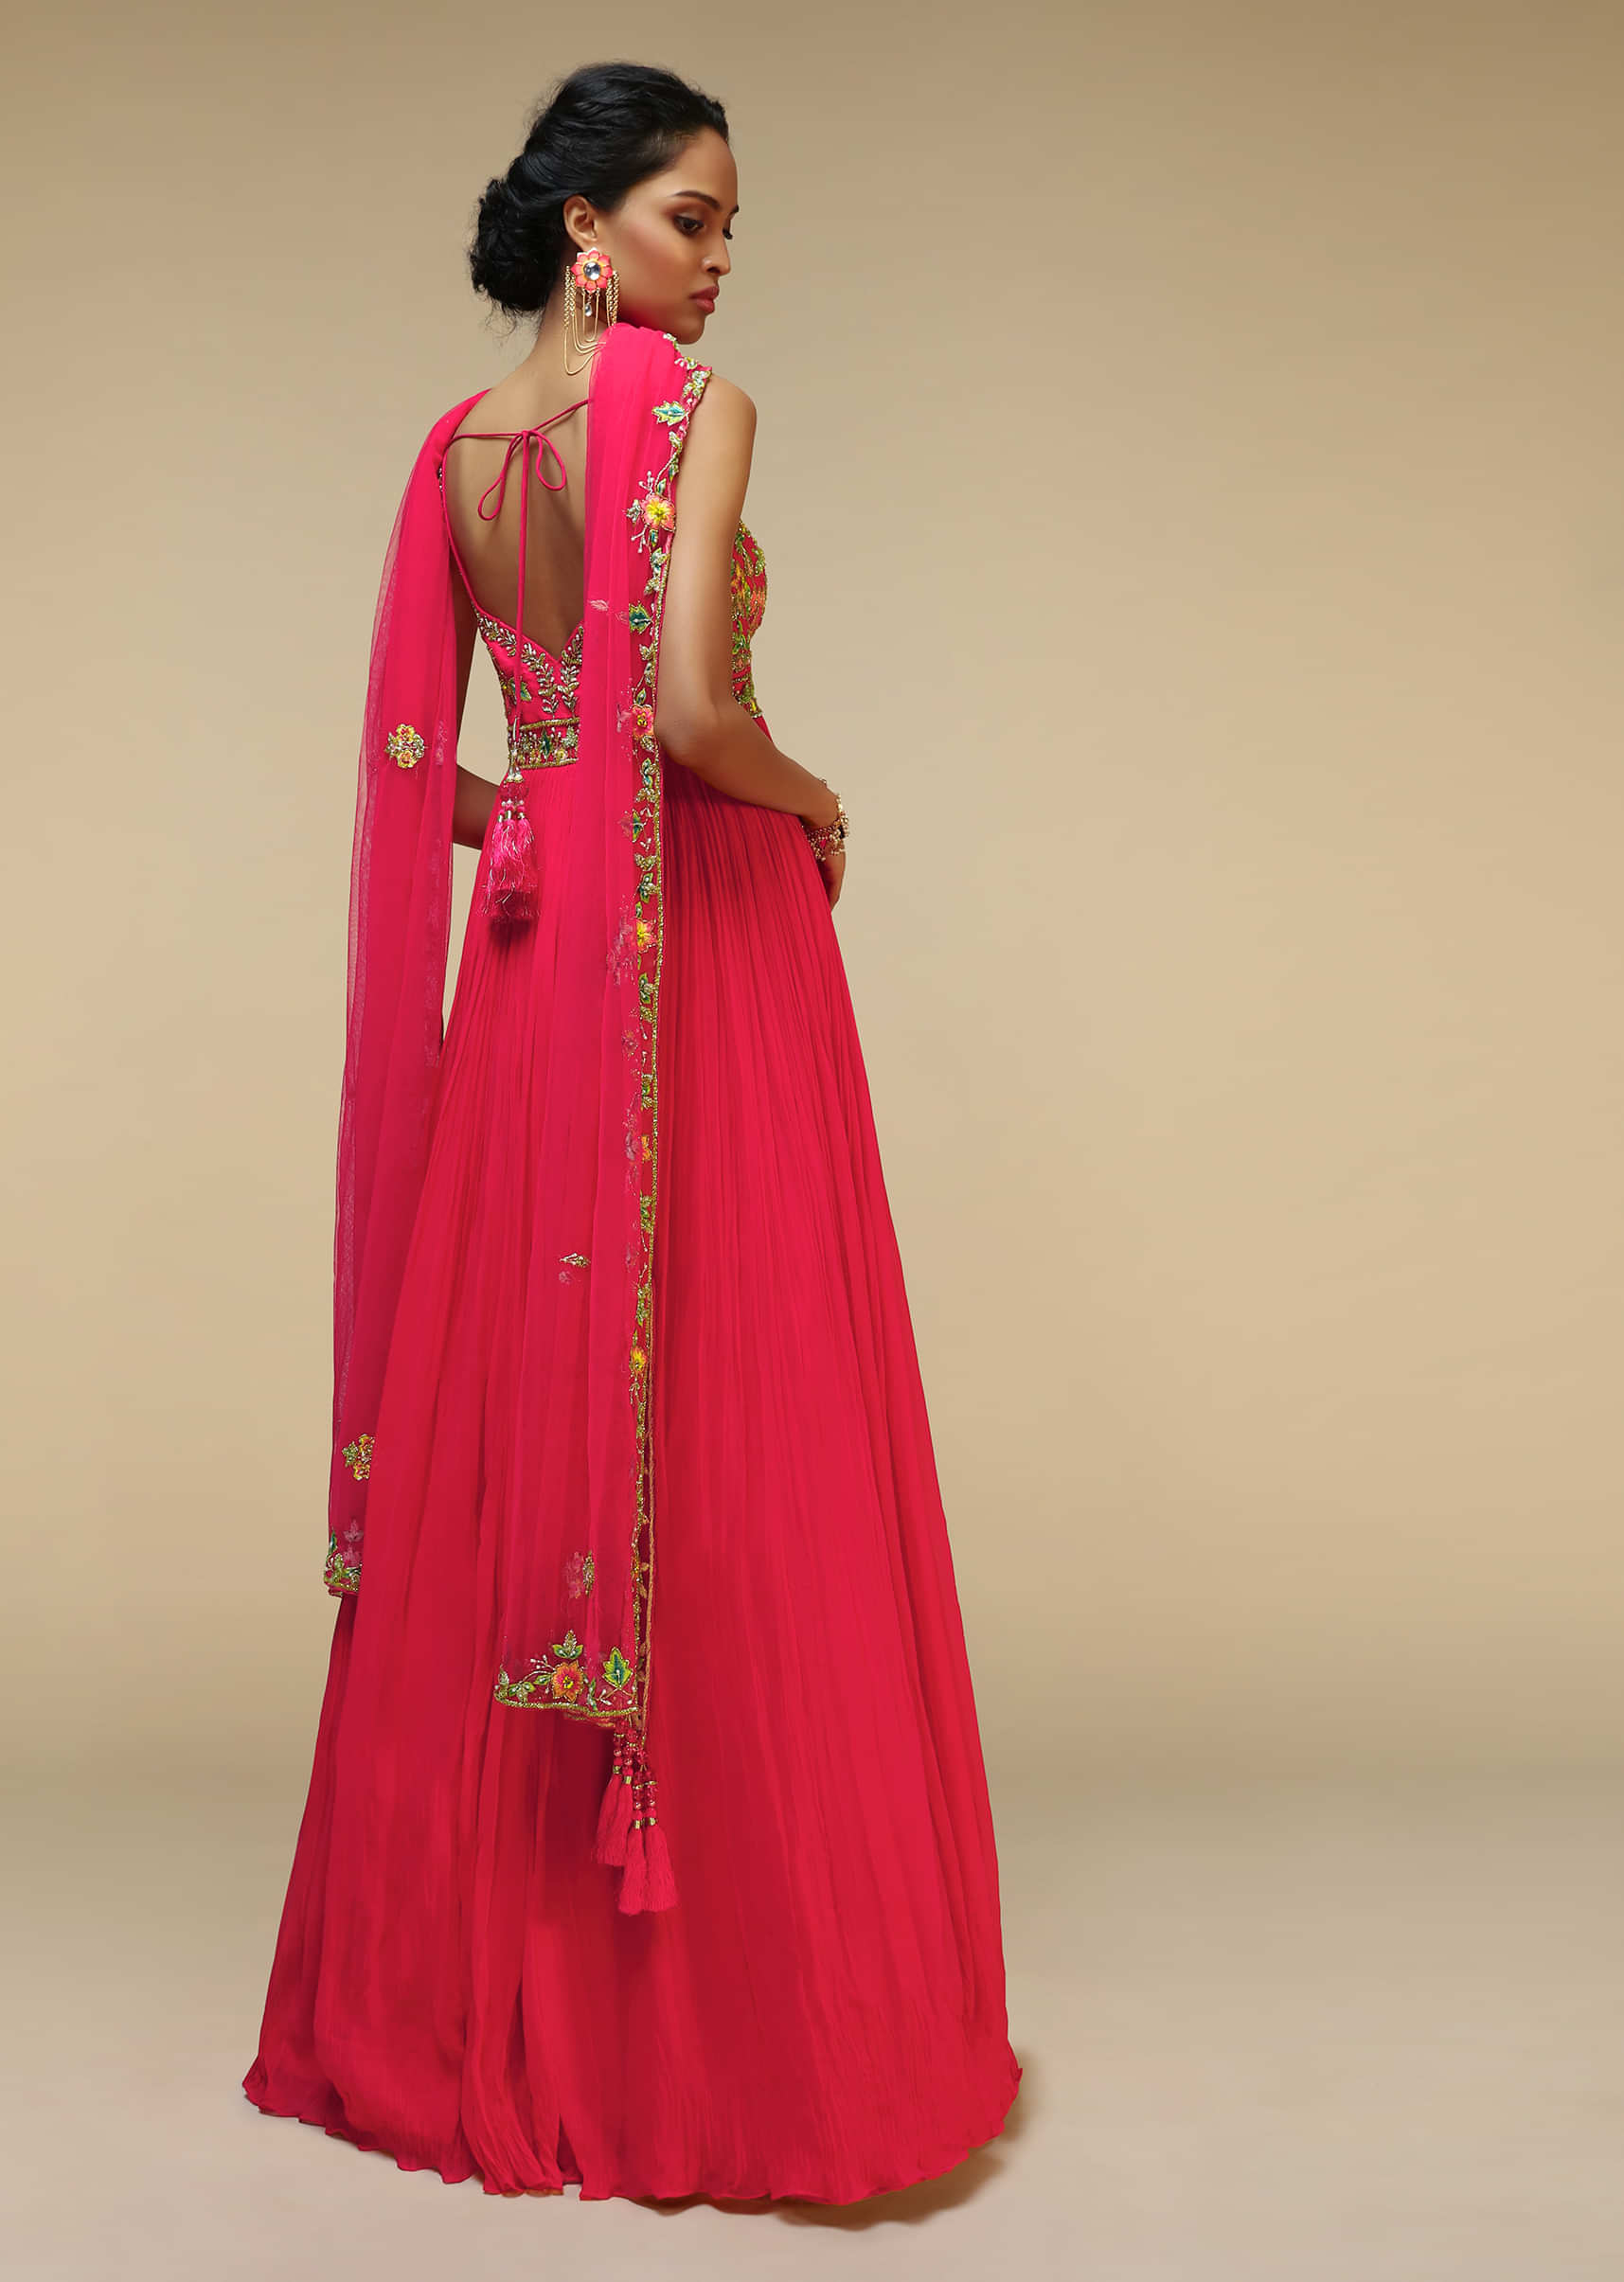 Rani Pink Anarkali Suit In Crushed Georgette With A Hand Embroidered Bodice Adorned In Multi Colored Resham And Sequins Work  